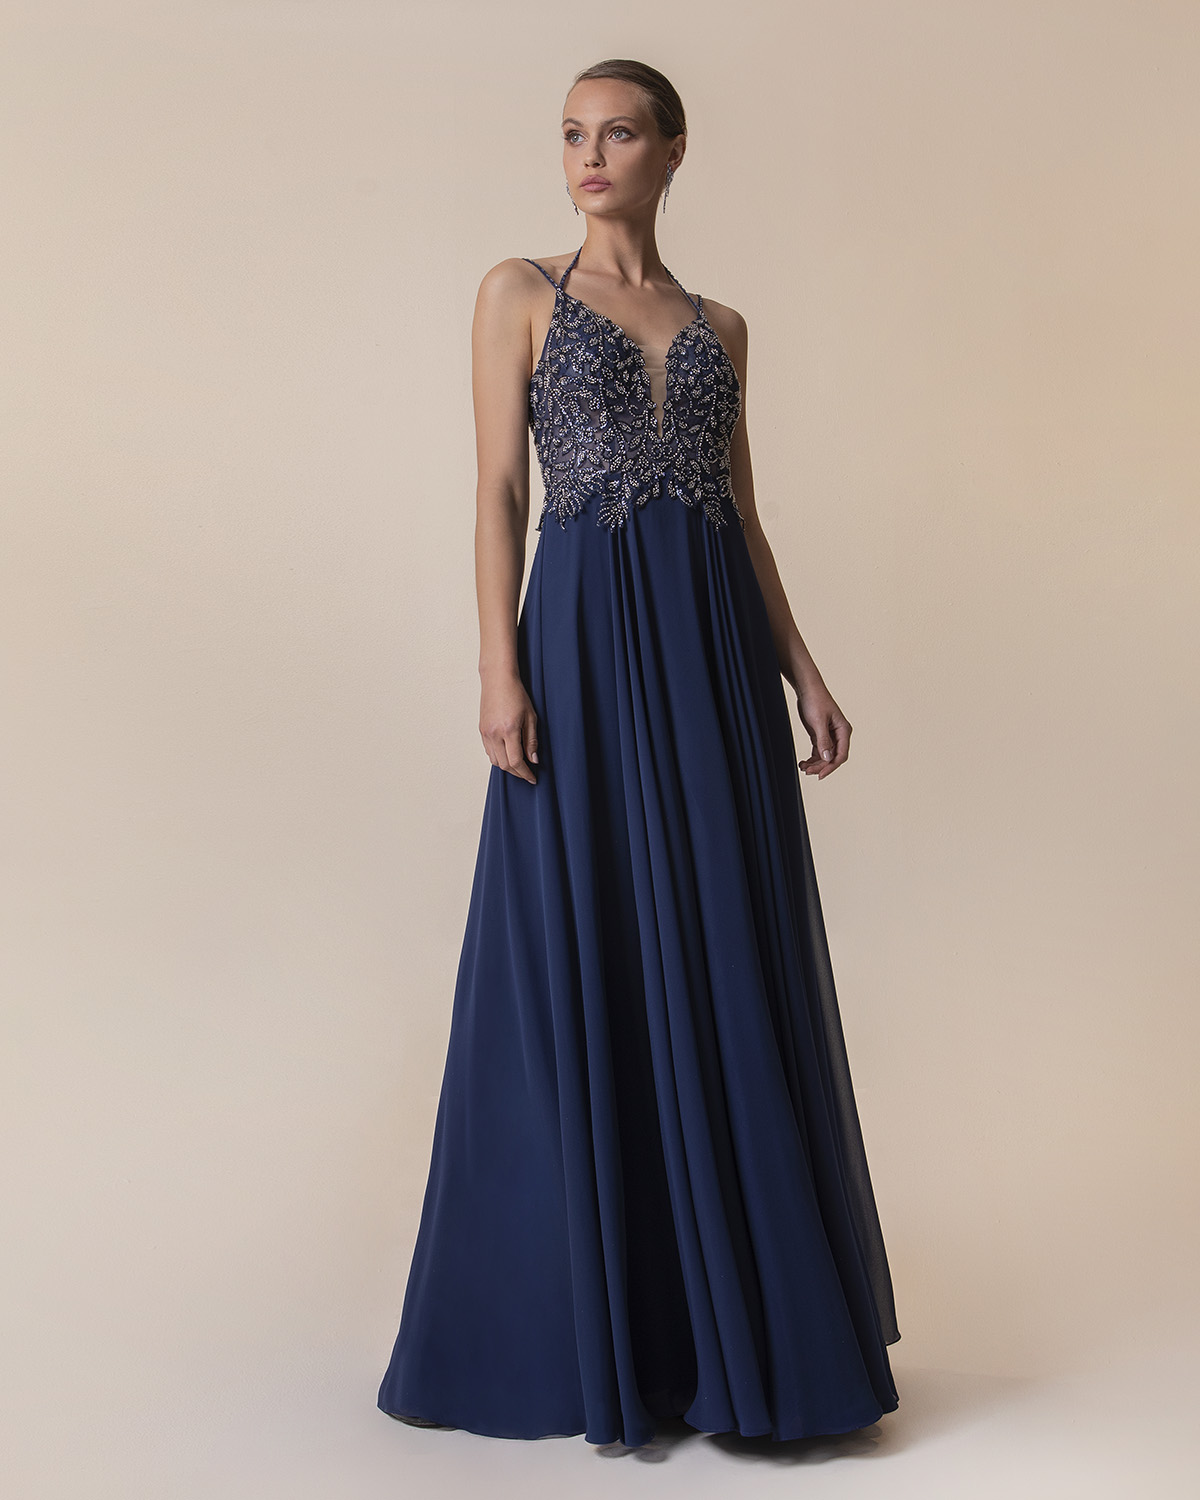 Evening Dresses / Long chiffon evening dress with fully beaded top